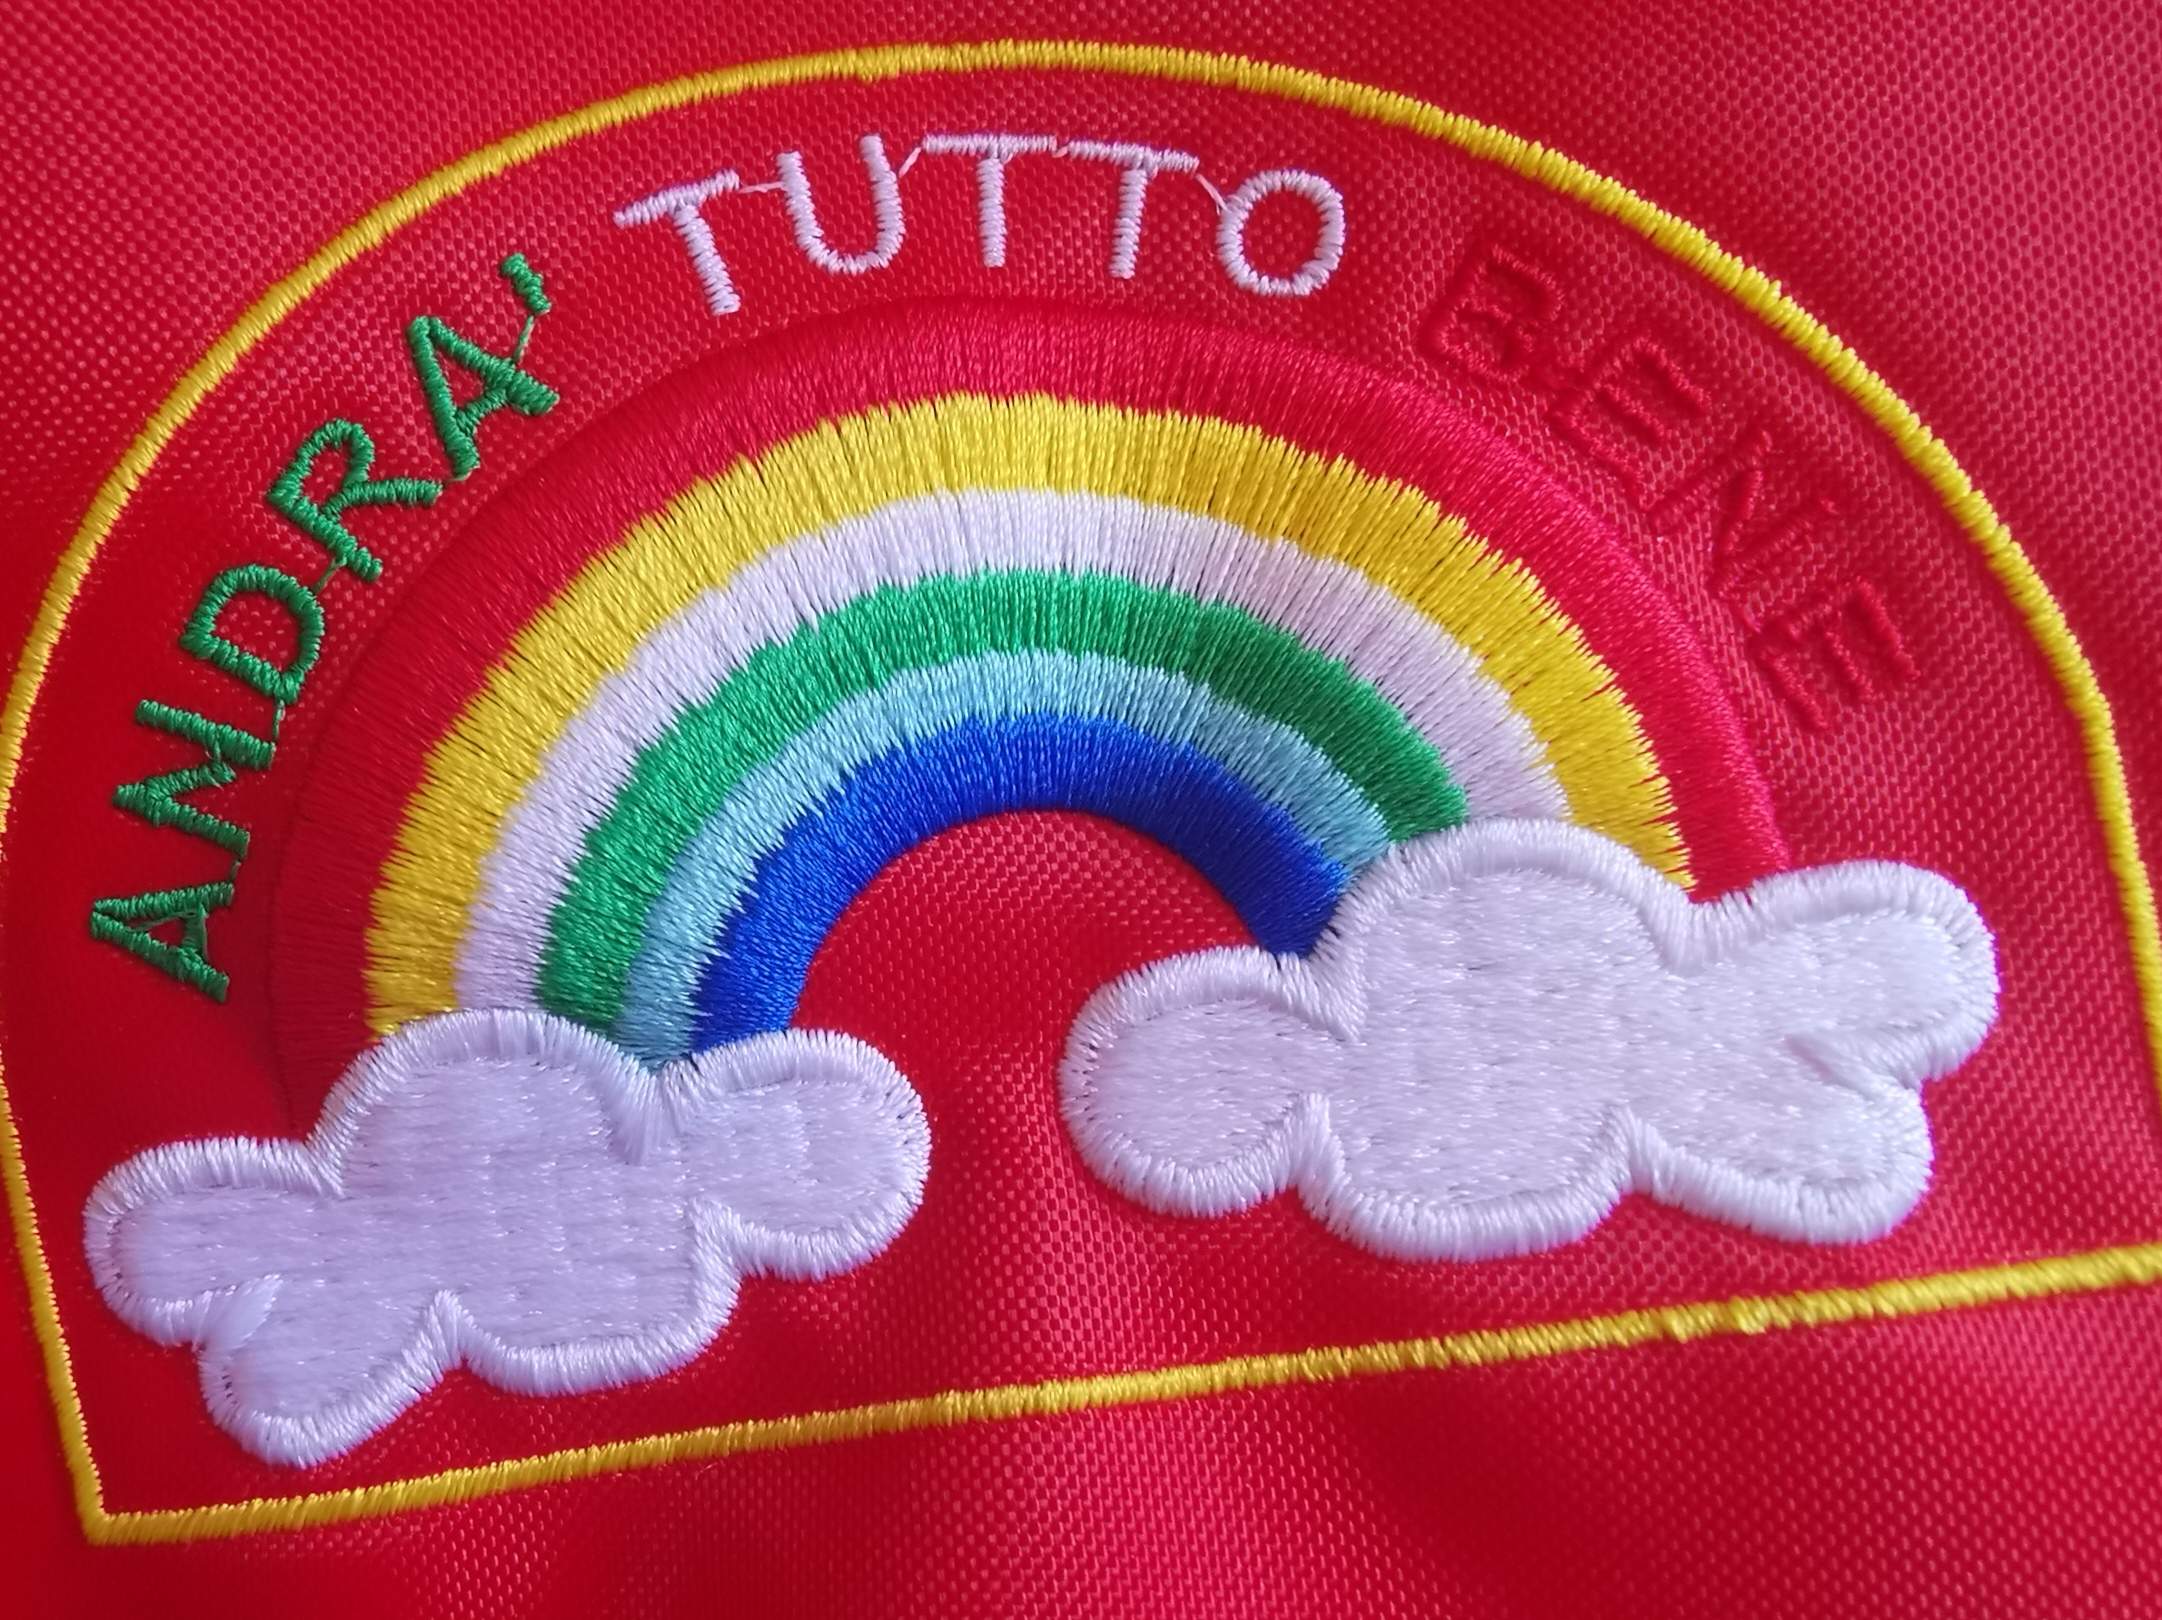 Patch ANDRA' TUTTO BENE